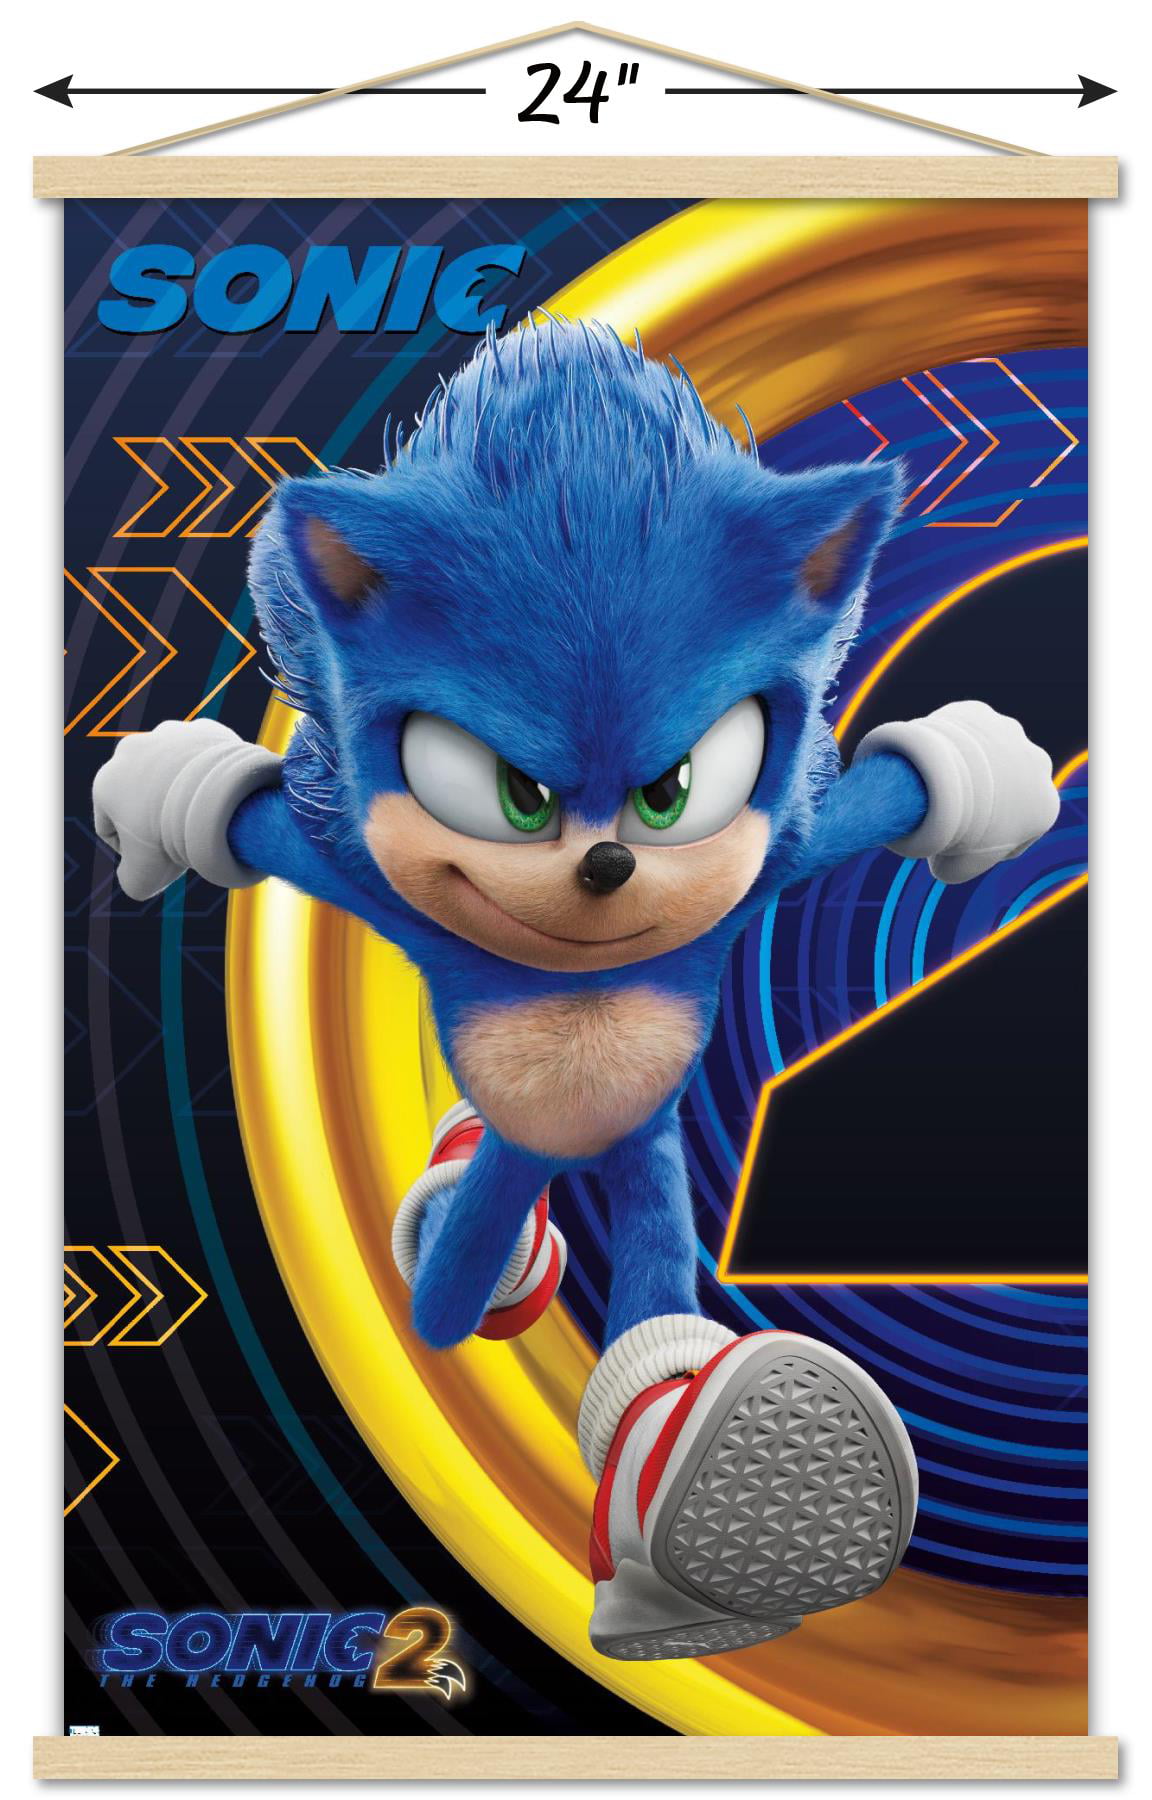 New Sonic Movie Poster  Sonic the movie, Hedgehog movie, Sonic